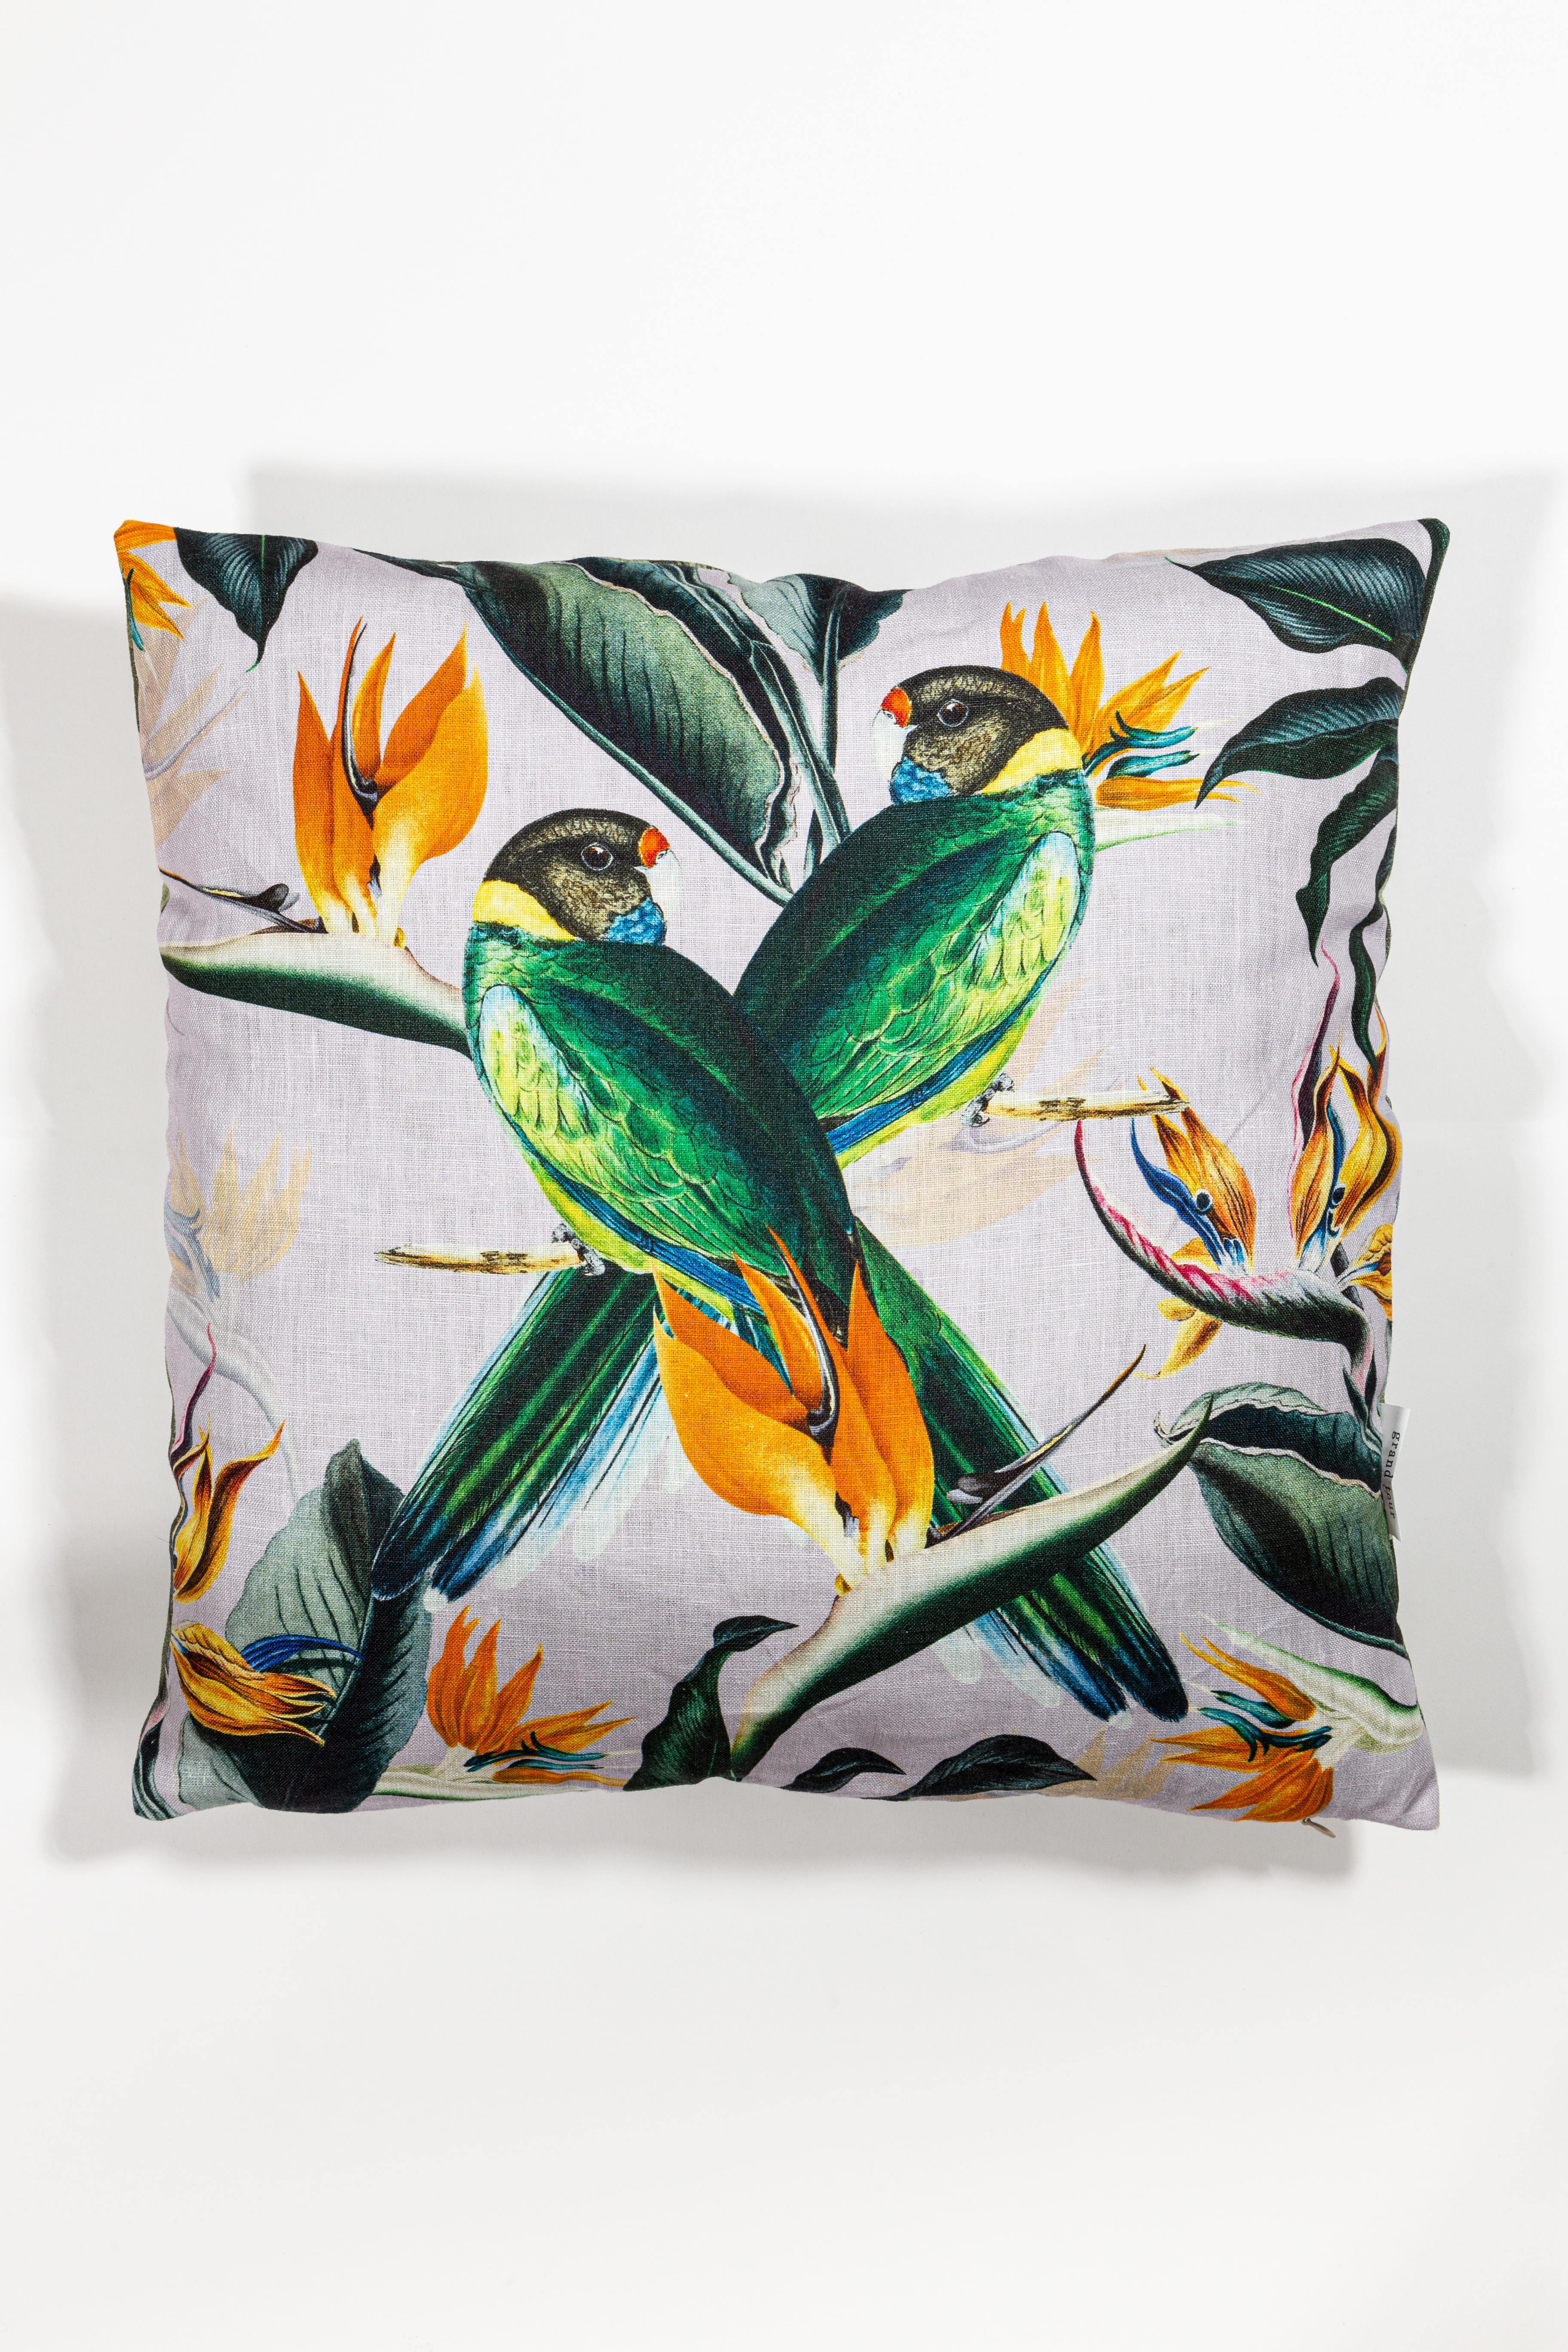 Animalia pillows is a set of cushions that tells the story of wild animals looking for love in spring time. Each pillow features two animals of the same species set in an explosion of flowers and vegetation. On the backside of the cushion there's a